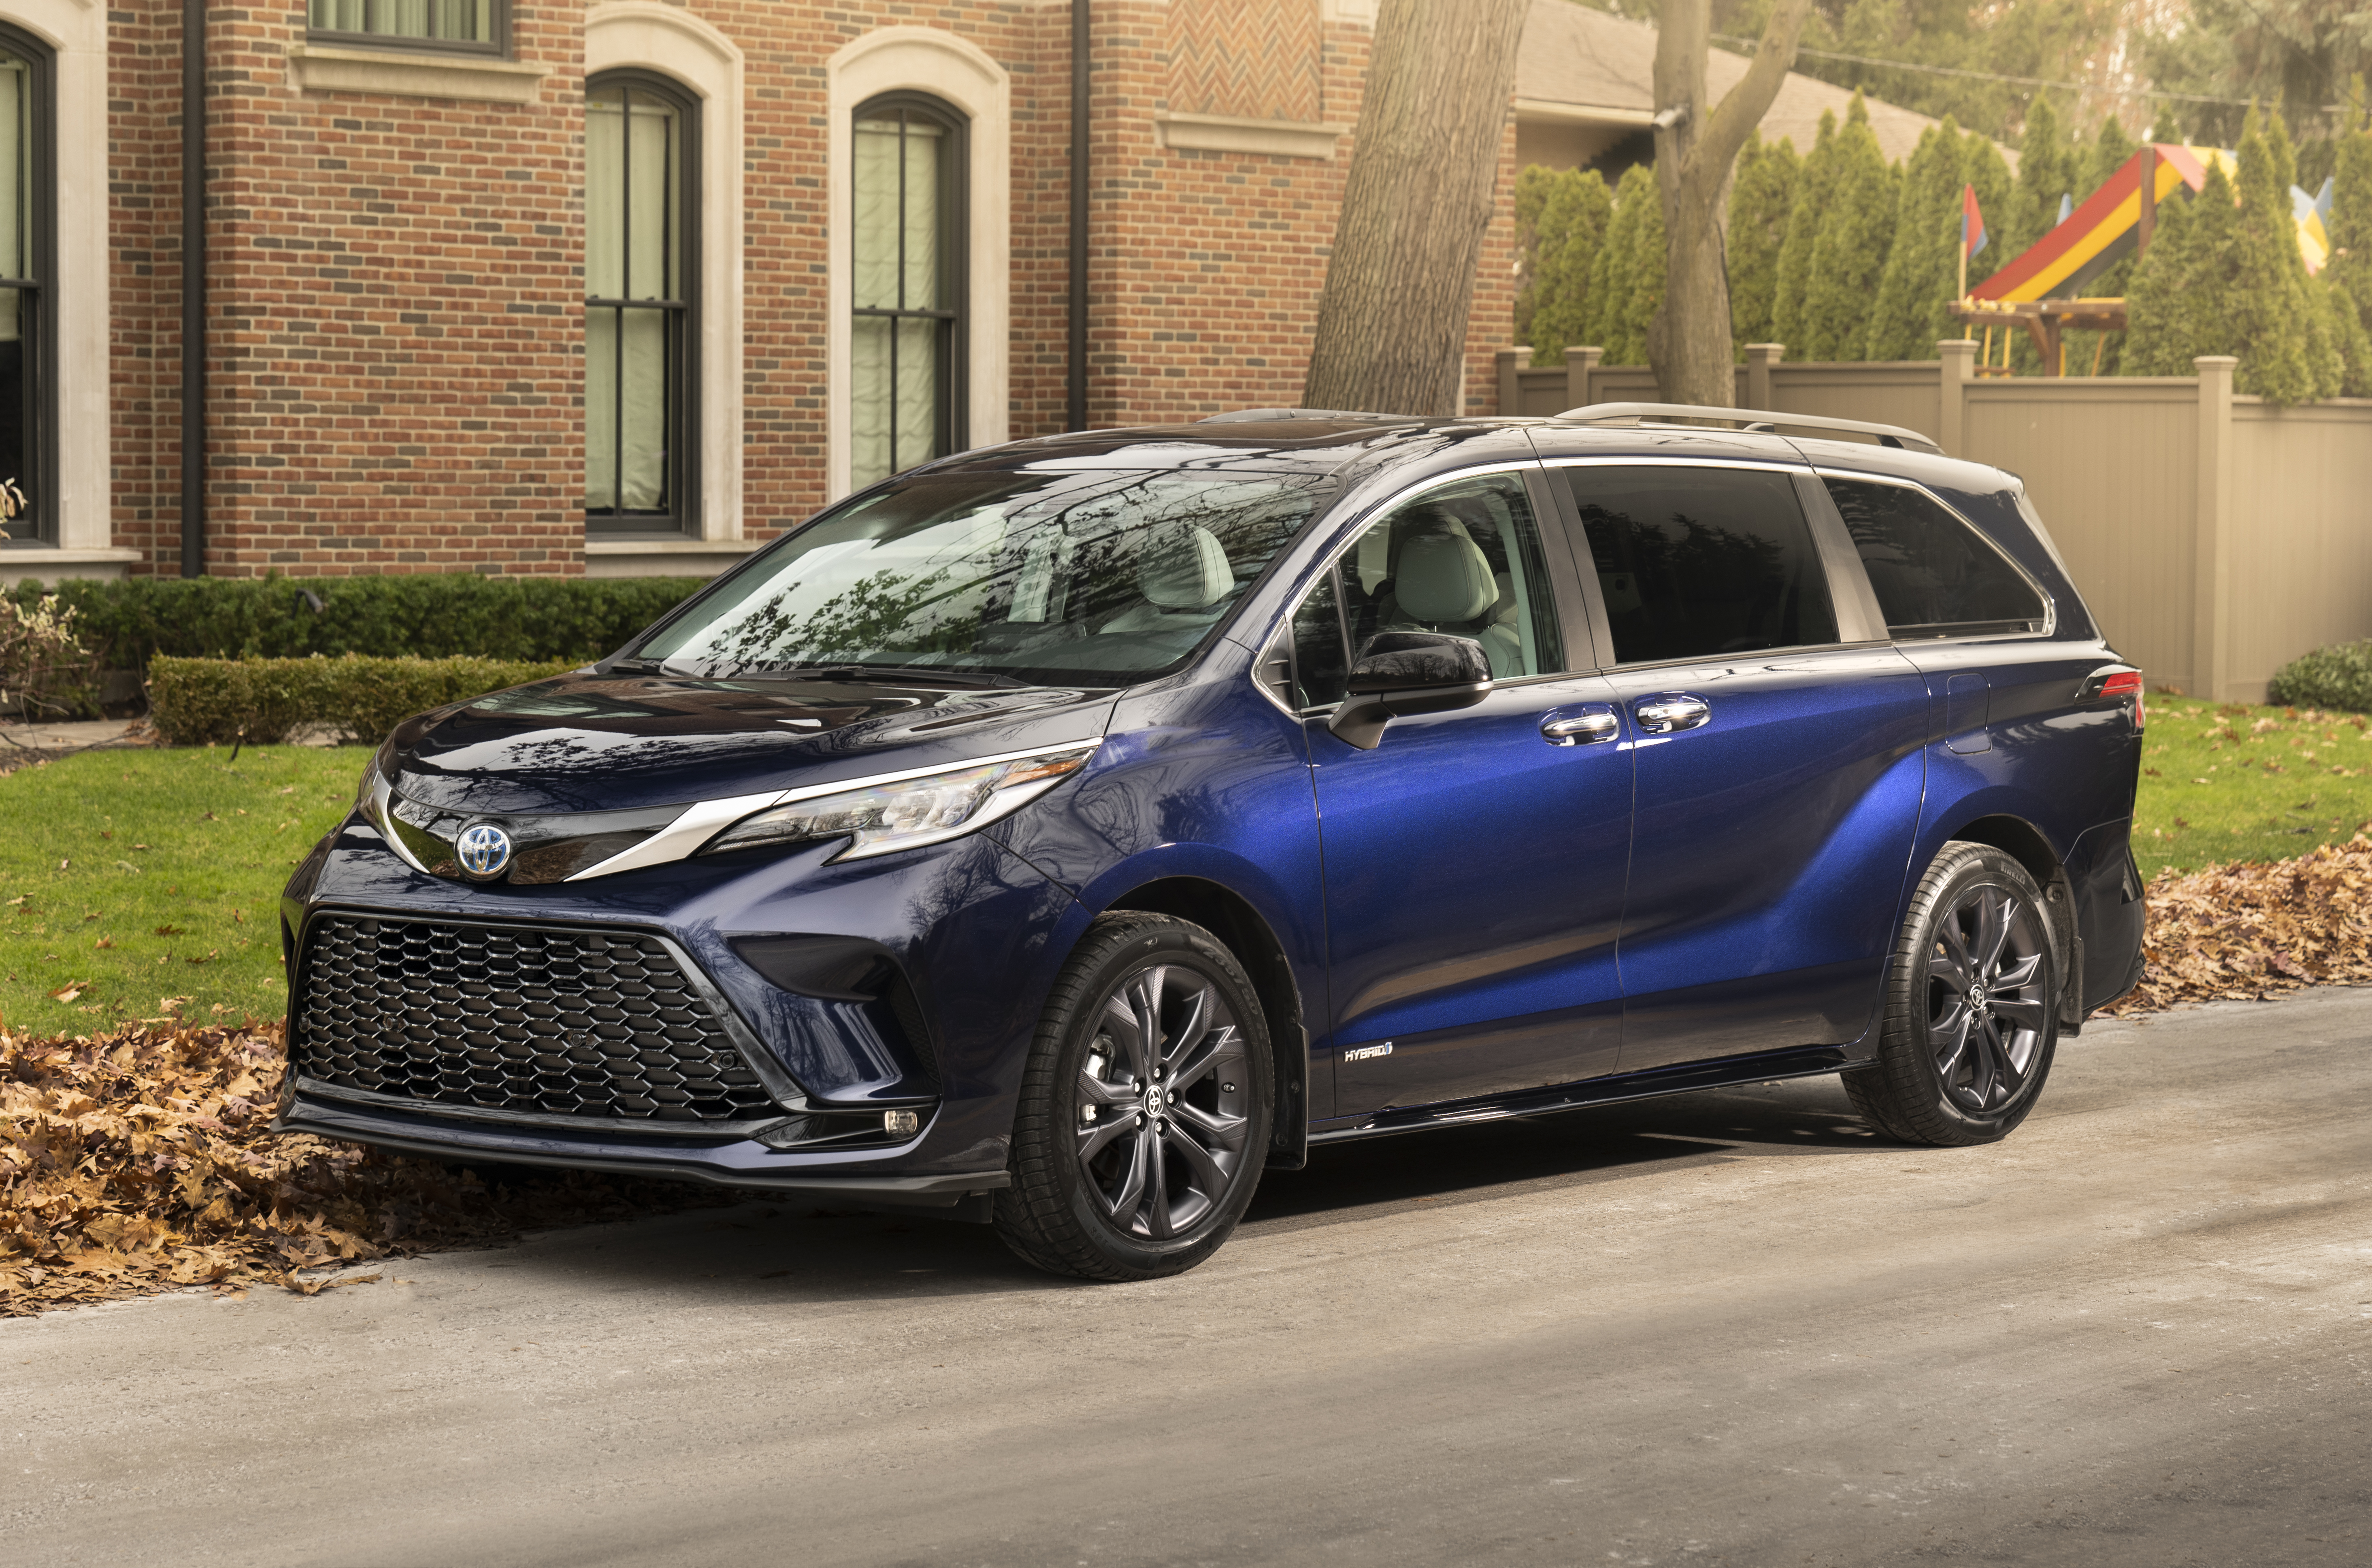 Live Your Life In Style, With The 2022 Toyota Sienna